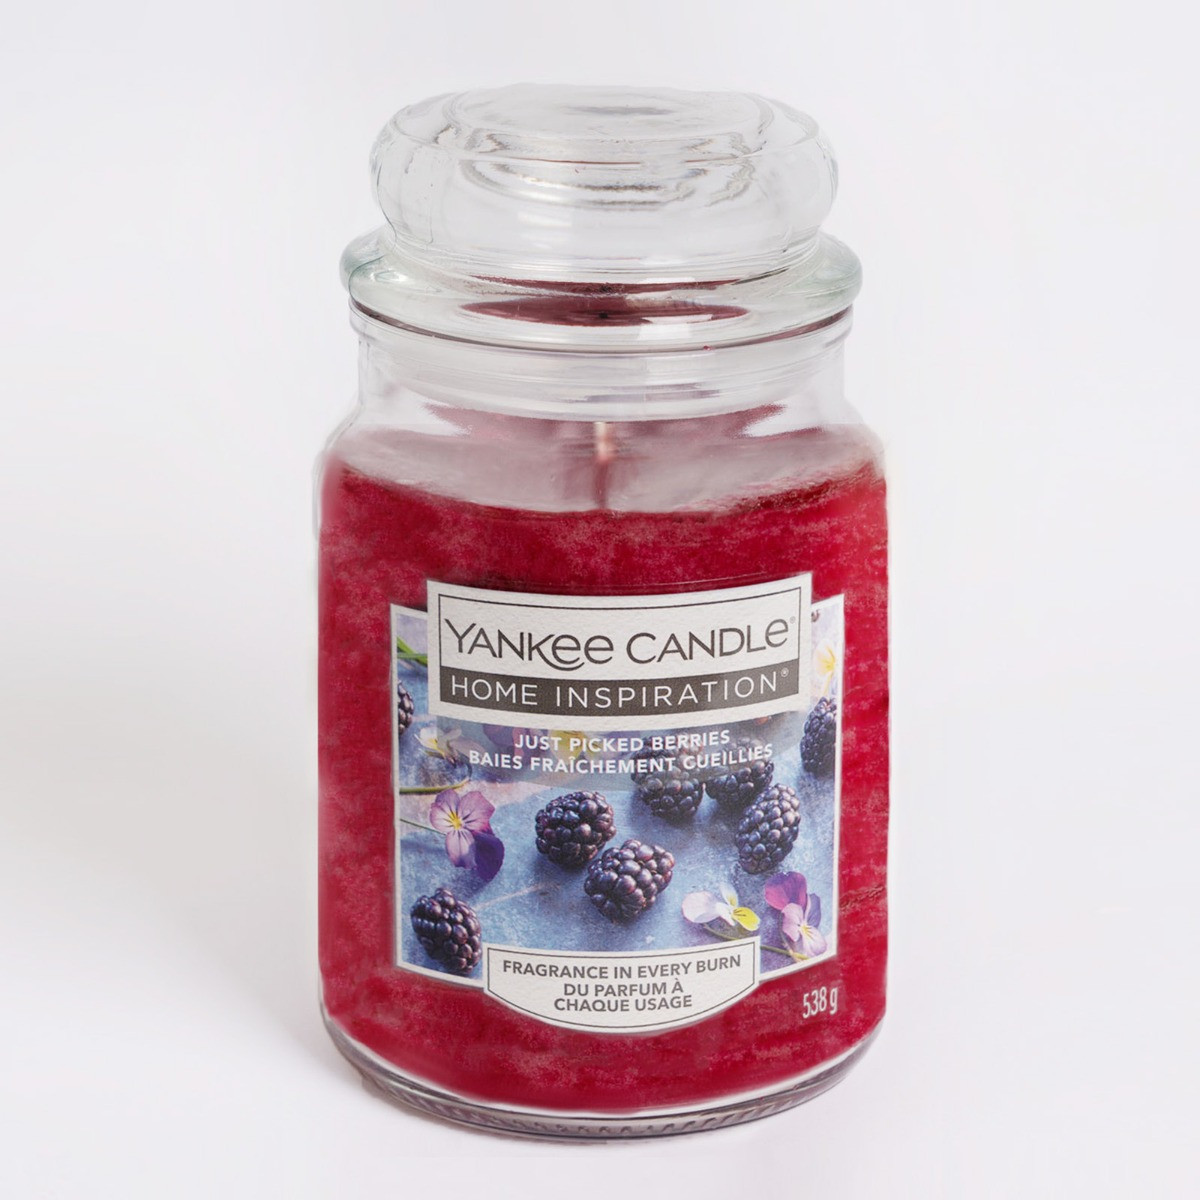 Yankee Candle Home Inspiration Large Jar - Just Picked Berries>